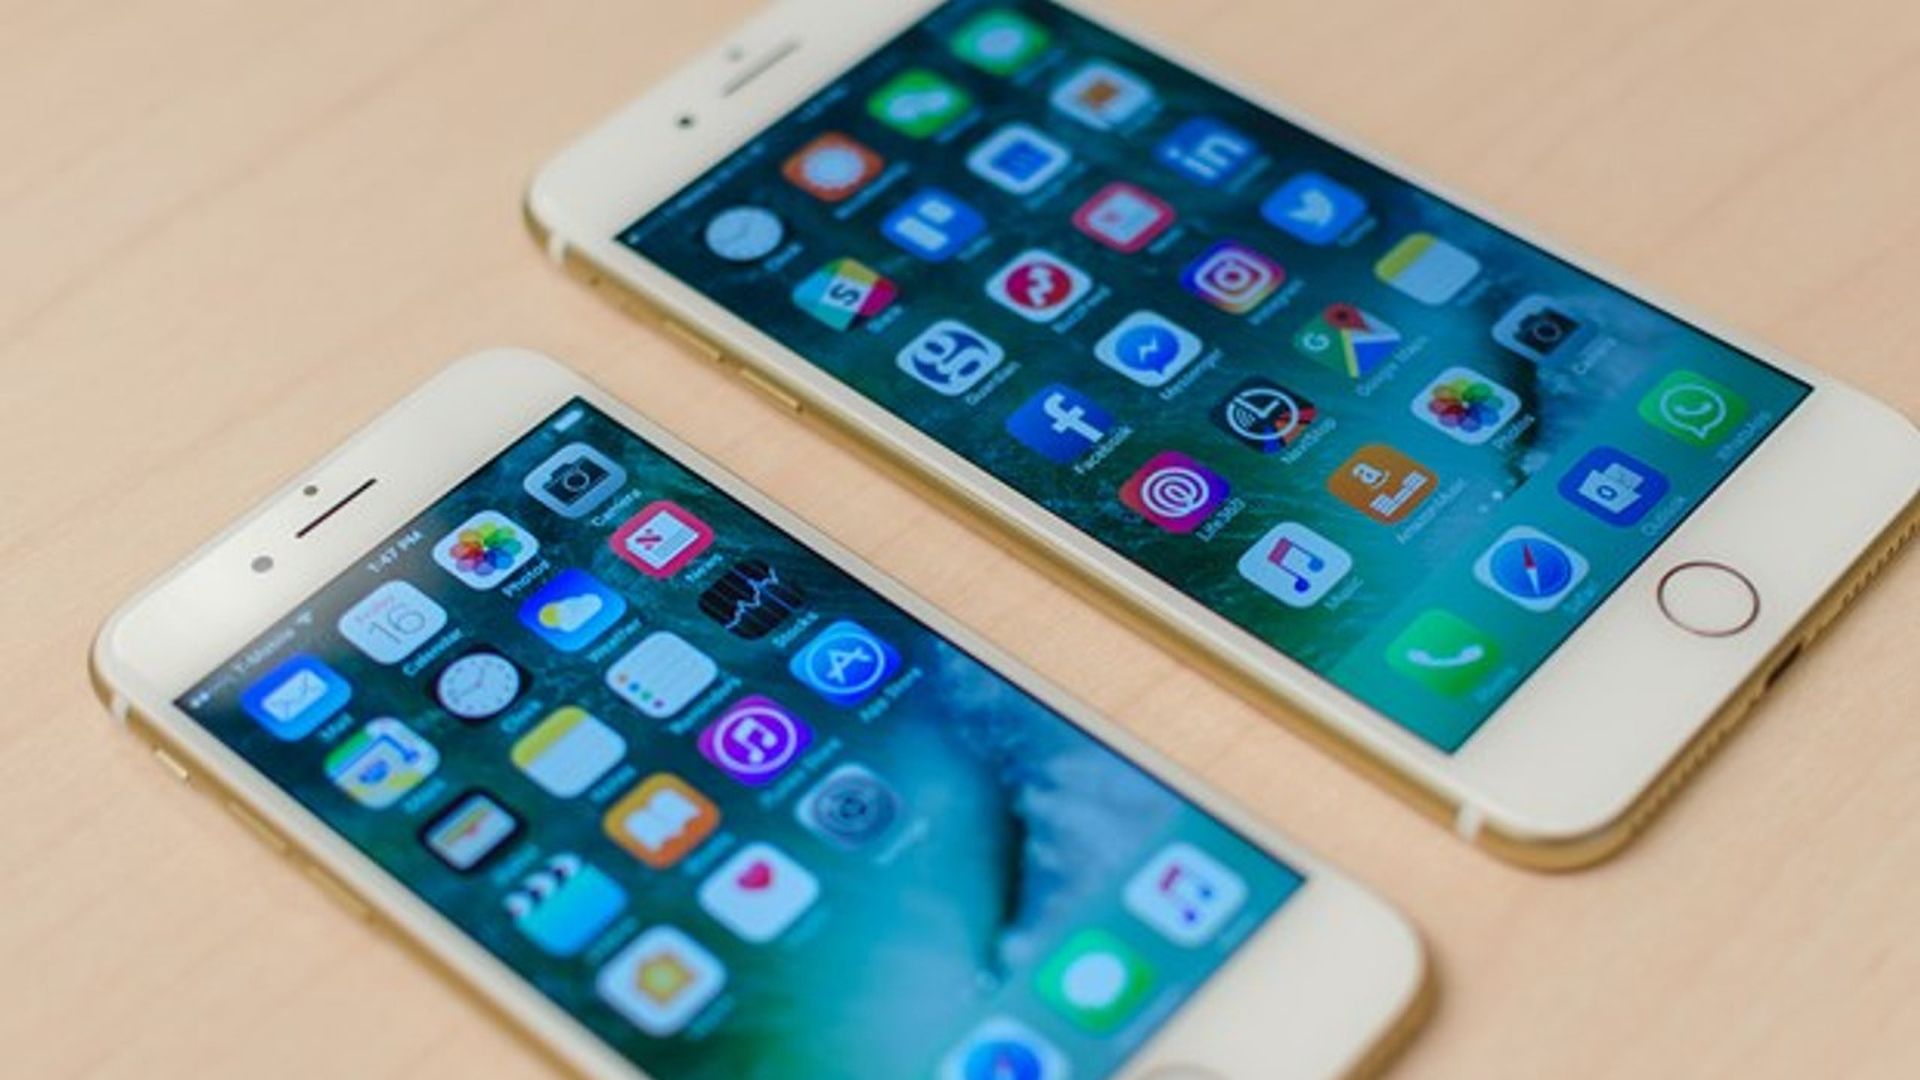 In this article, we are going to be covering the Apple iPhone lawsuit over battery issues, as well as how to get money from Apple lawsuit if you were affected.